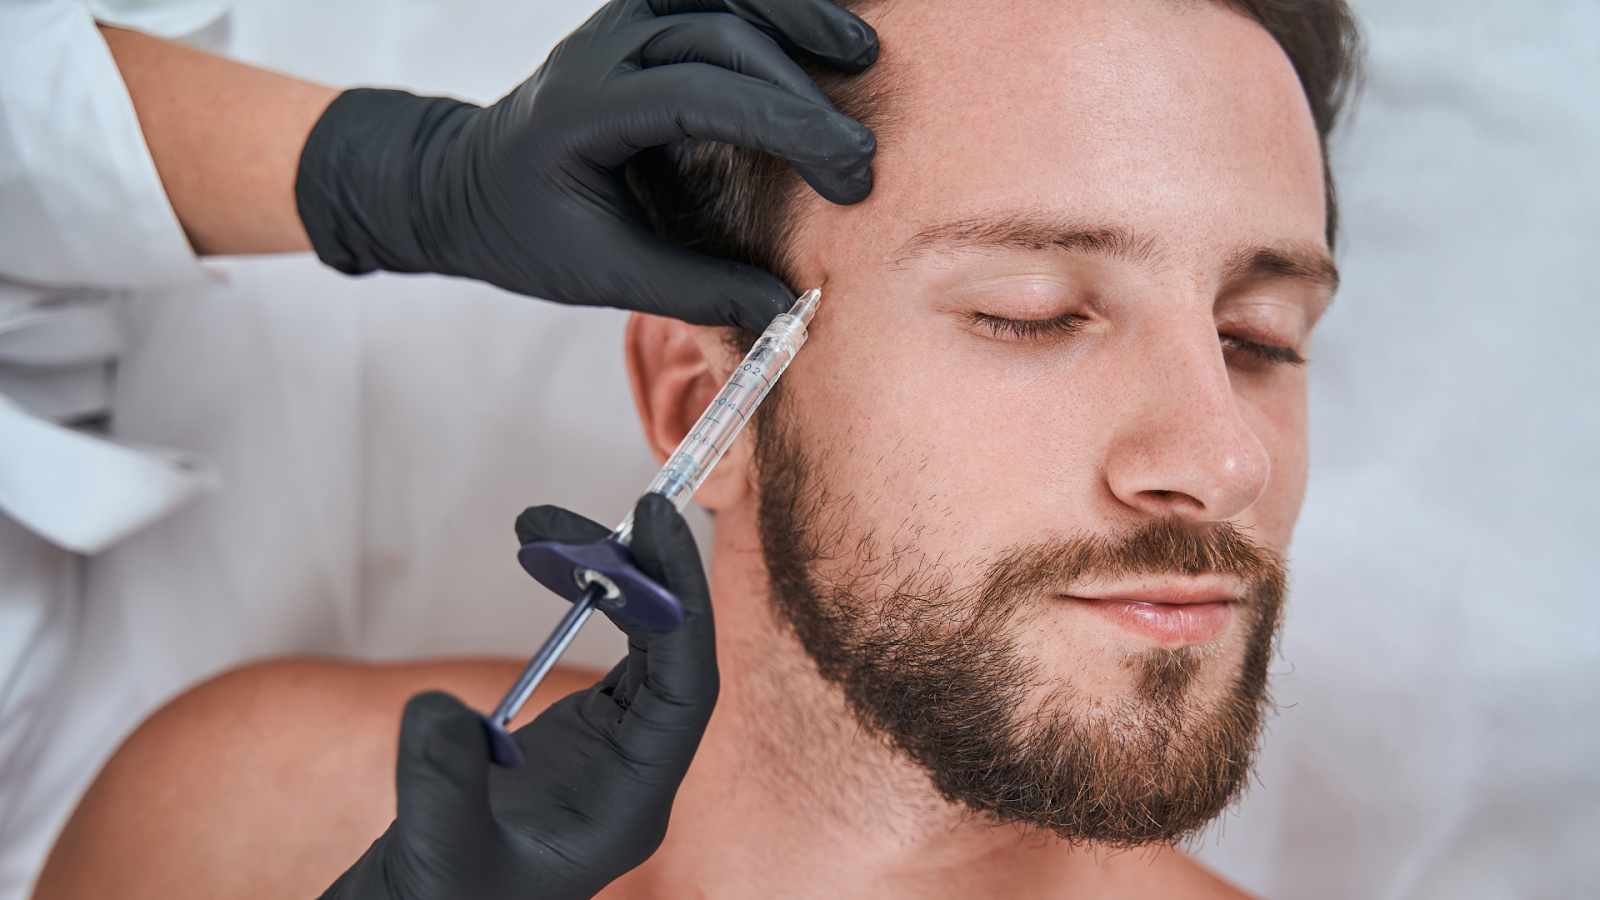 Man getting injected with dermal filler.